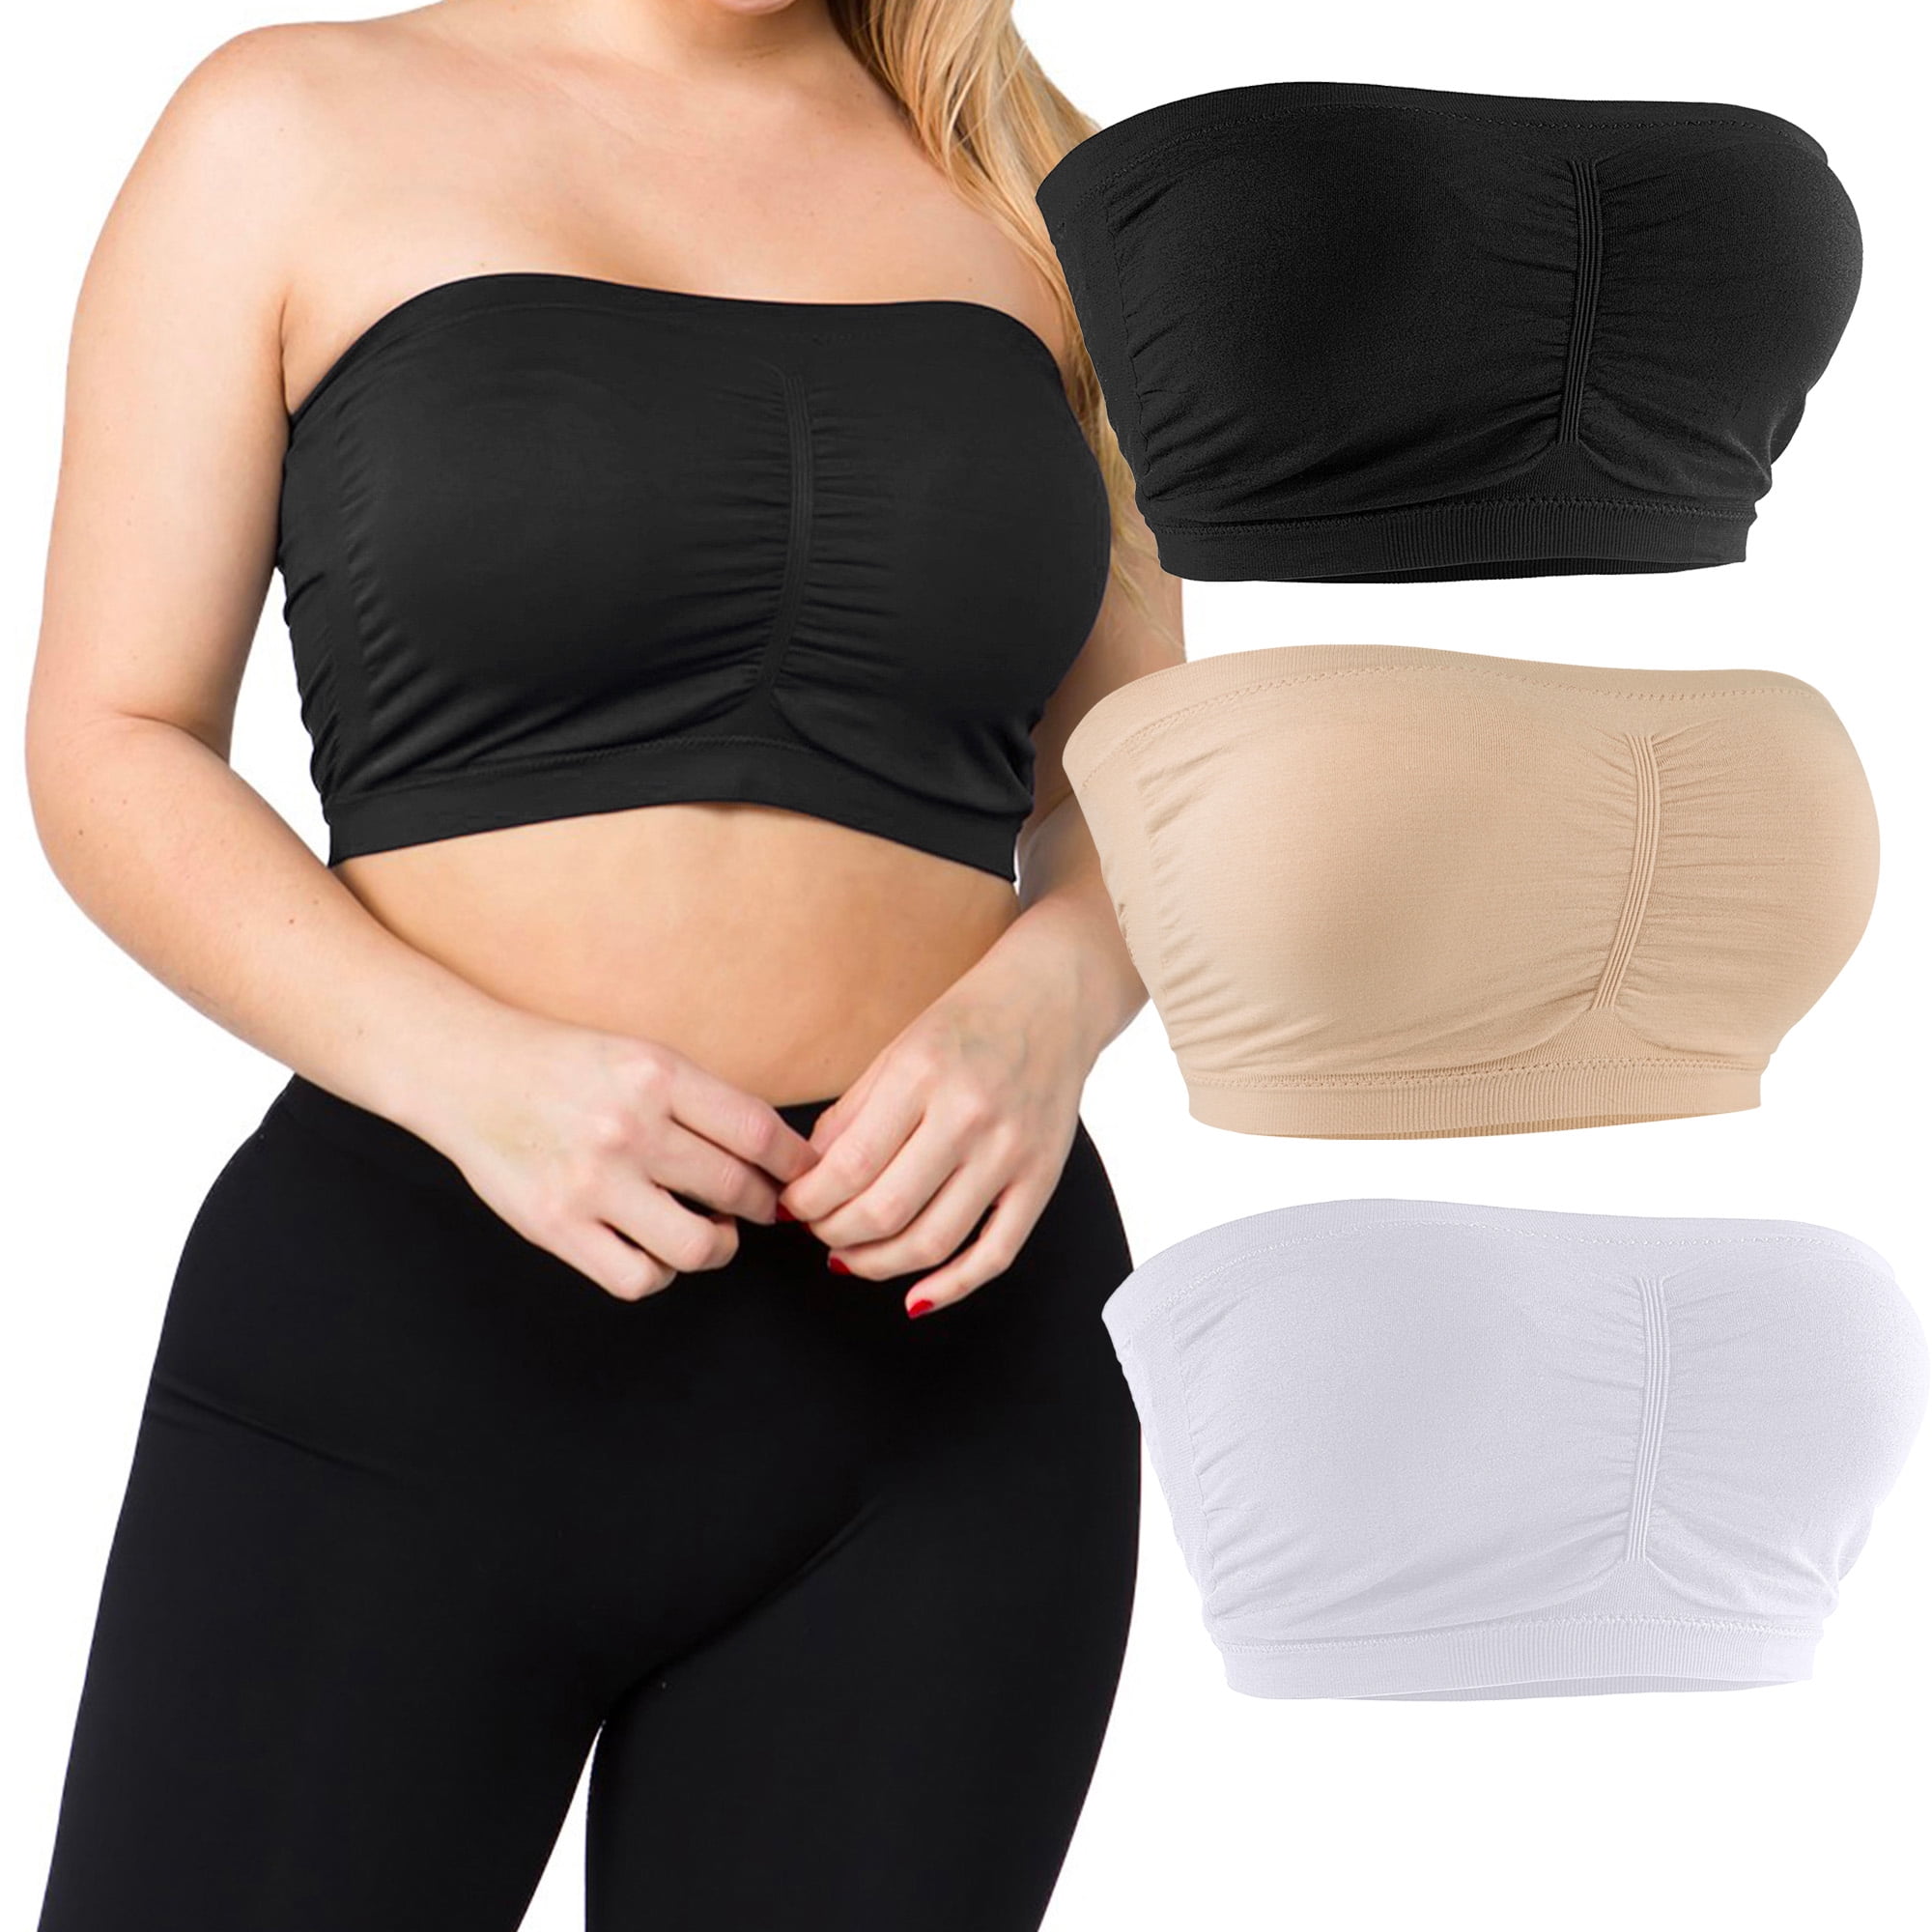 LAVRA Women's Plus Size Strapless Bandeau Padded Tube Top Bra